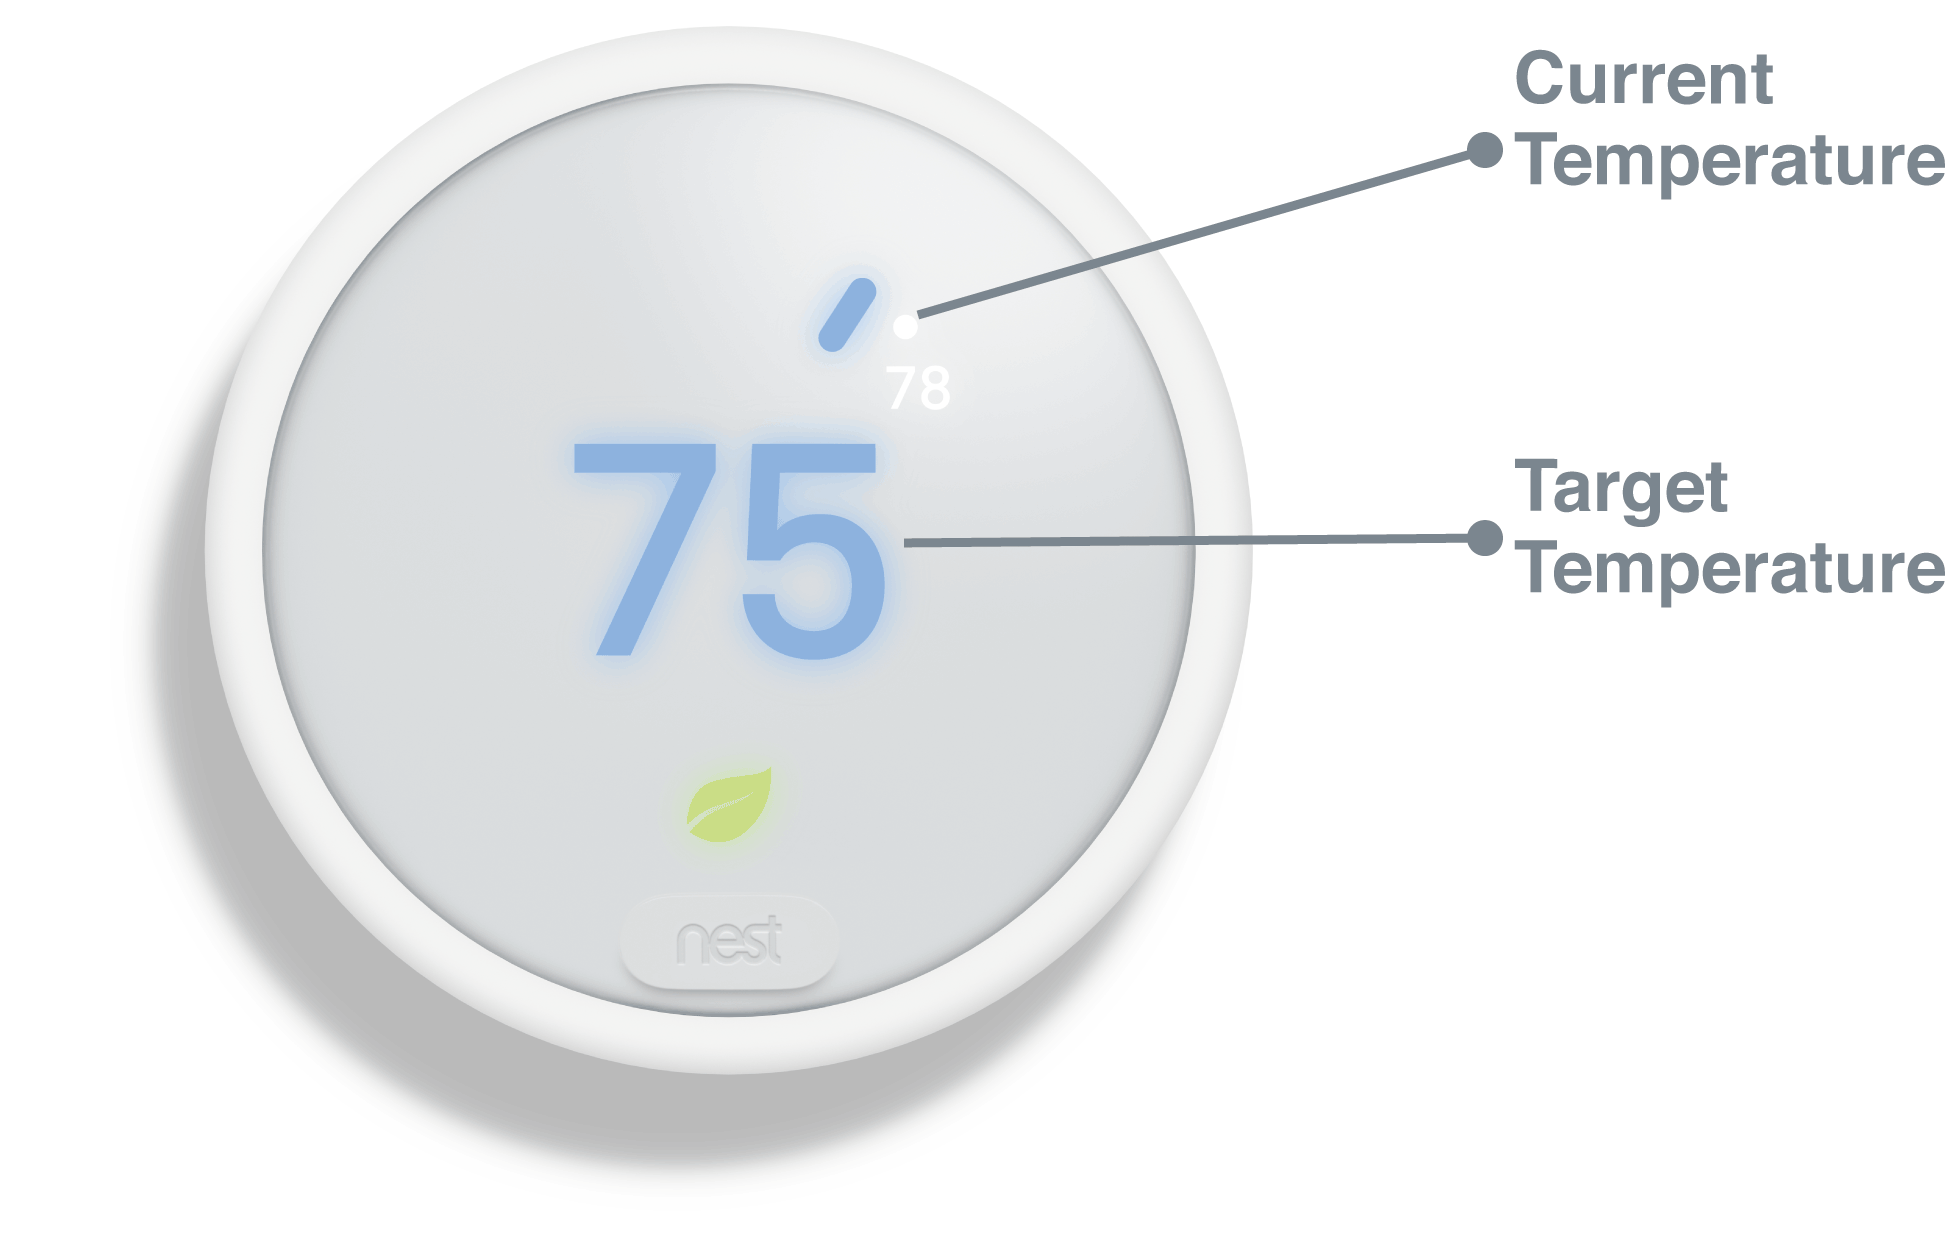 Temperature Logo - Learn about what you'll see on your Nest thermostat